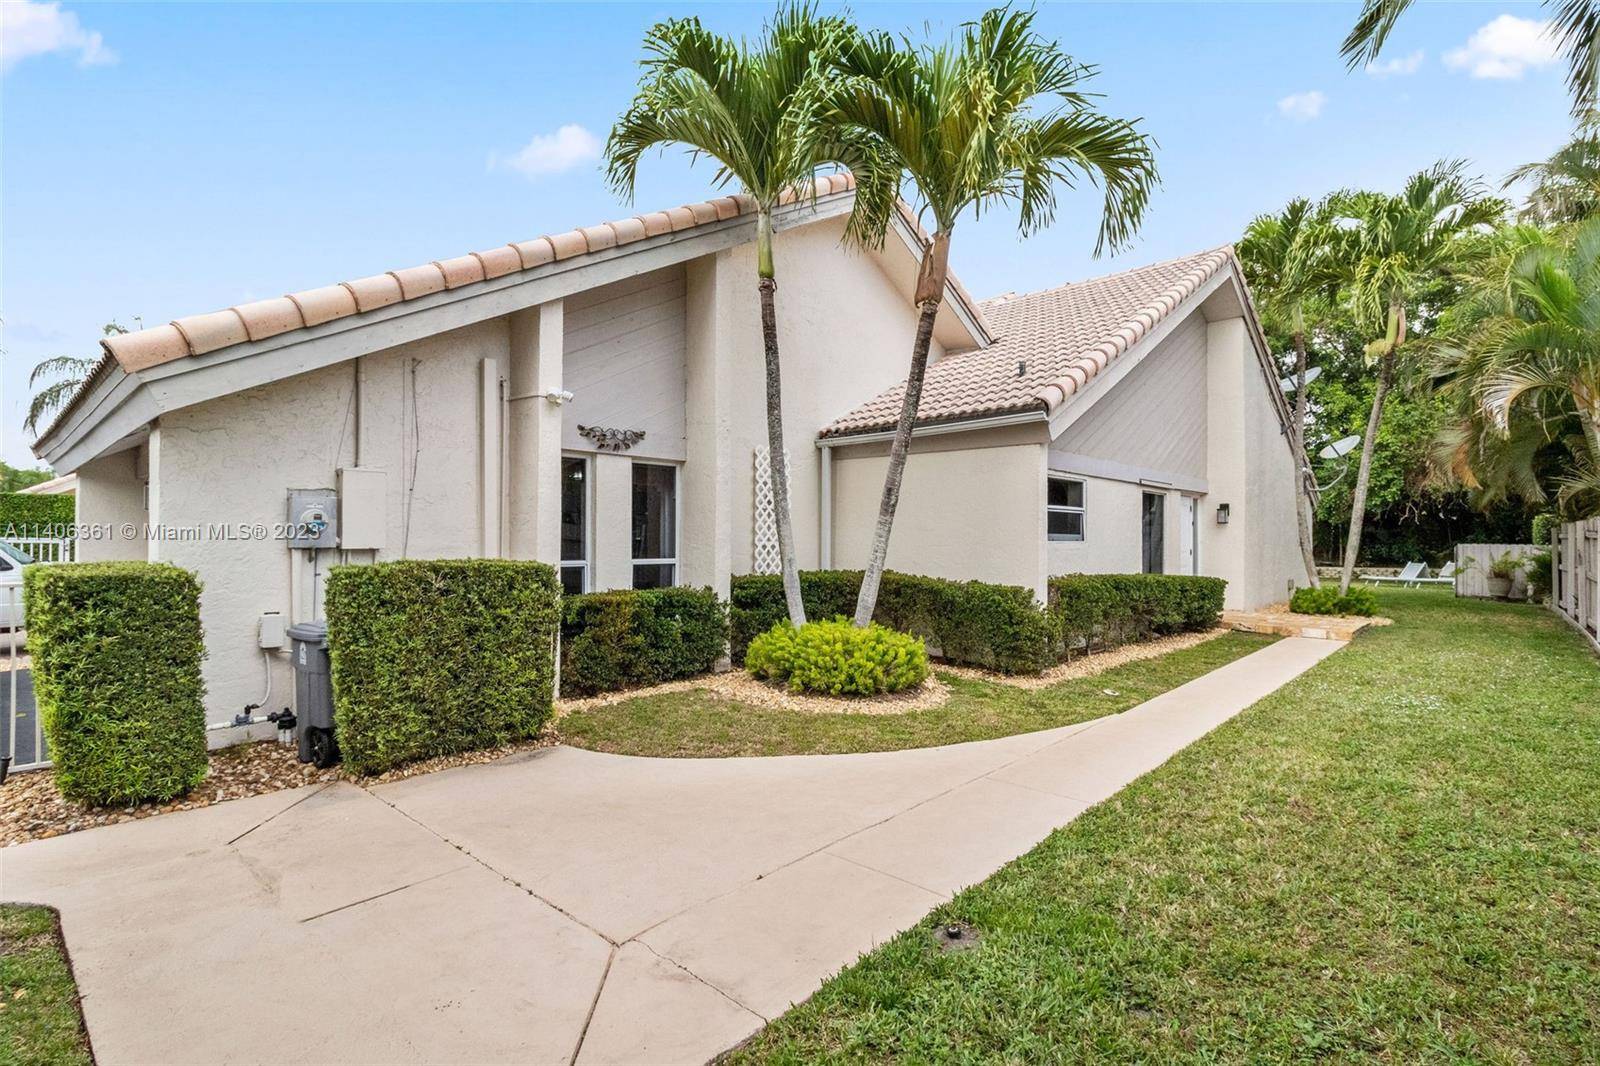 PRICE REDUCED FOR FAST SALE This gated community 3 2 remodeled house is rare to find.